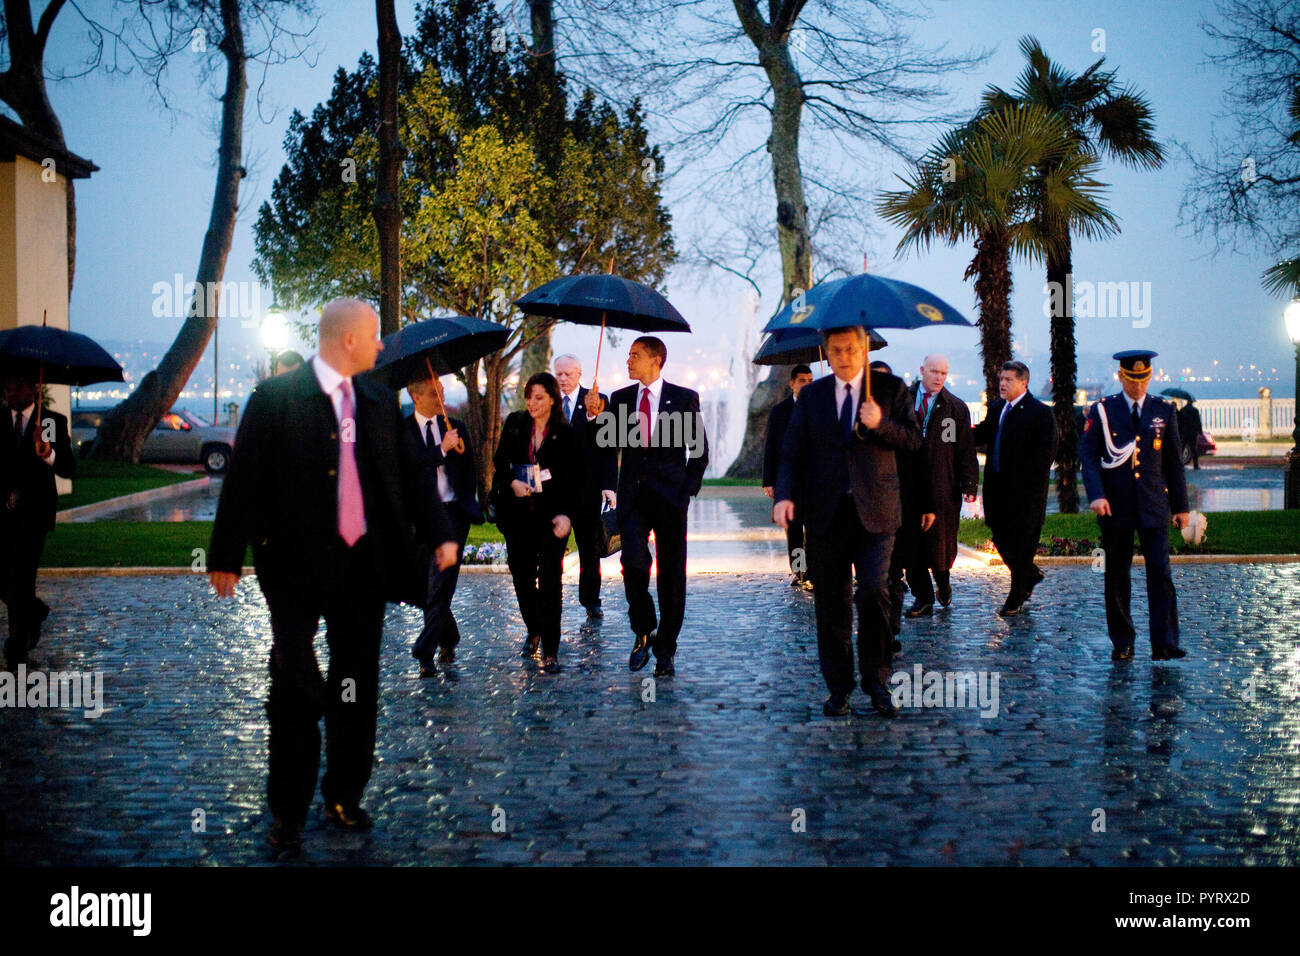 President Barack Obama and members of his staff arrive for a reception April 6, 2009, at the Dolmabahce Palace in Istanbul. Stock Photo